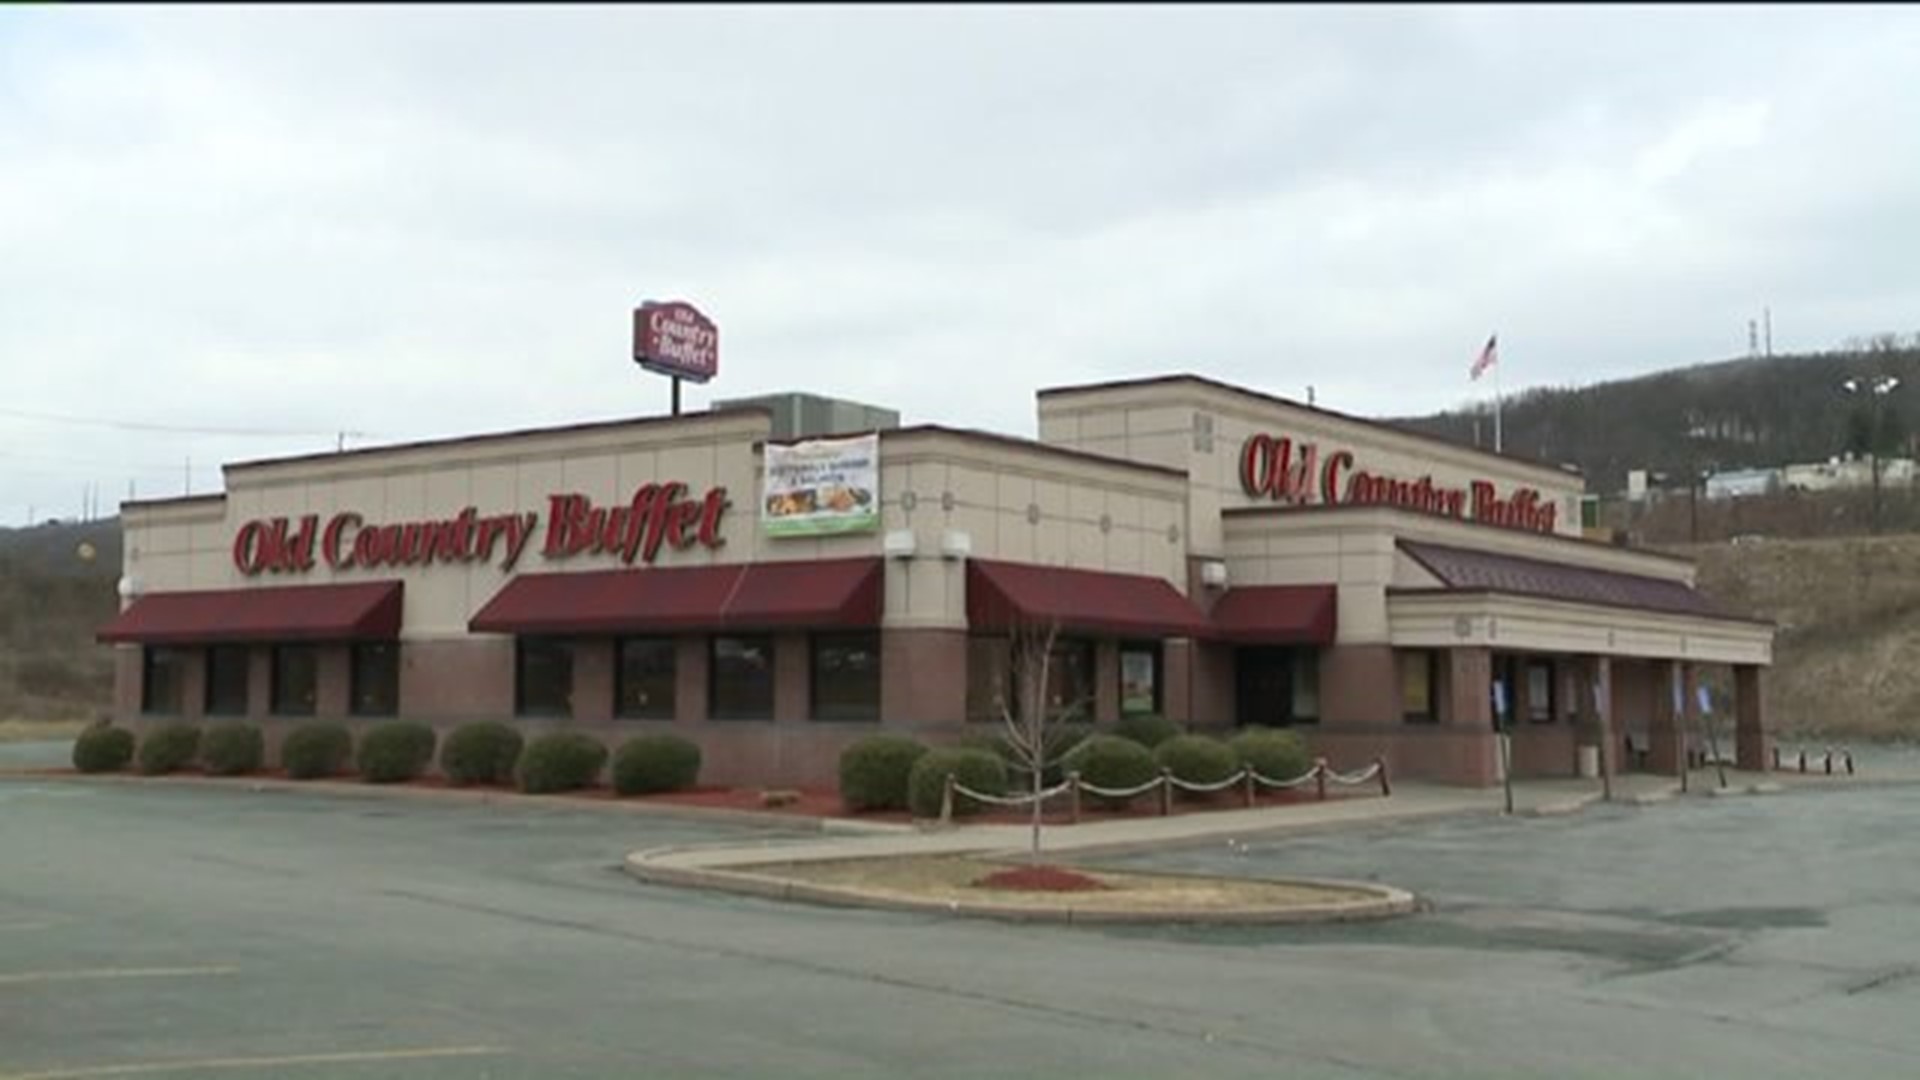 Old Country Buffet Restaurants in Lackawanna, Luzerne Counties Close  without Warning 